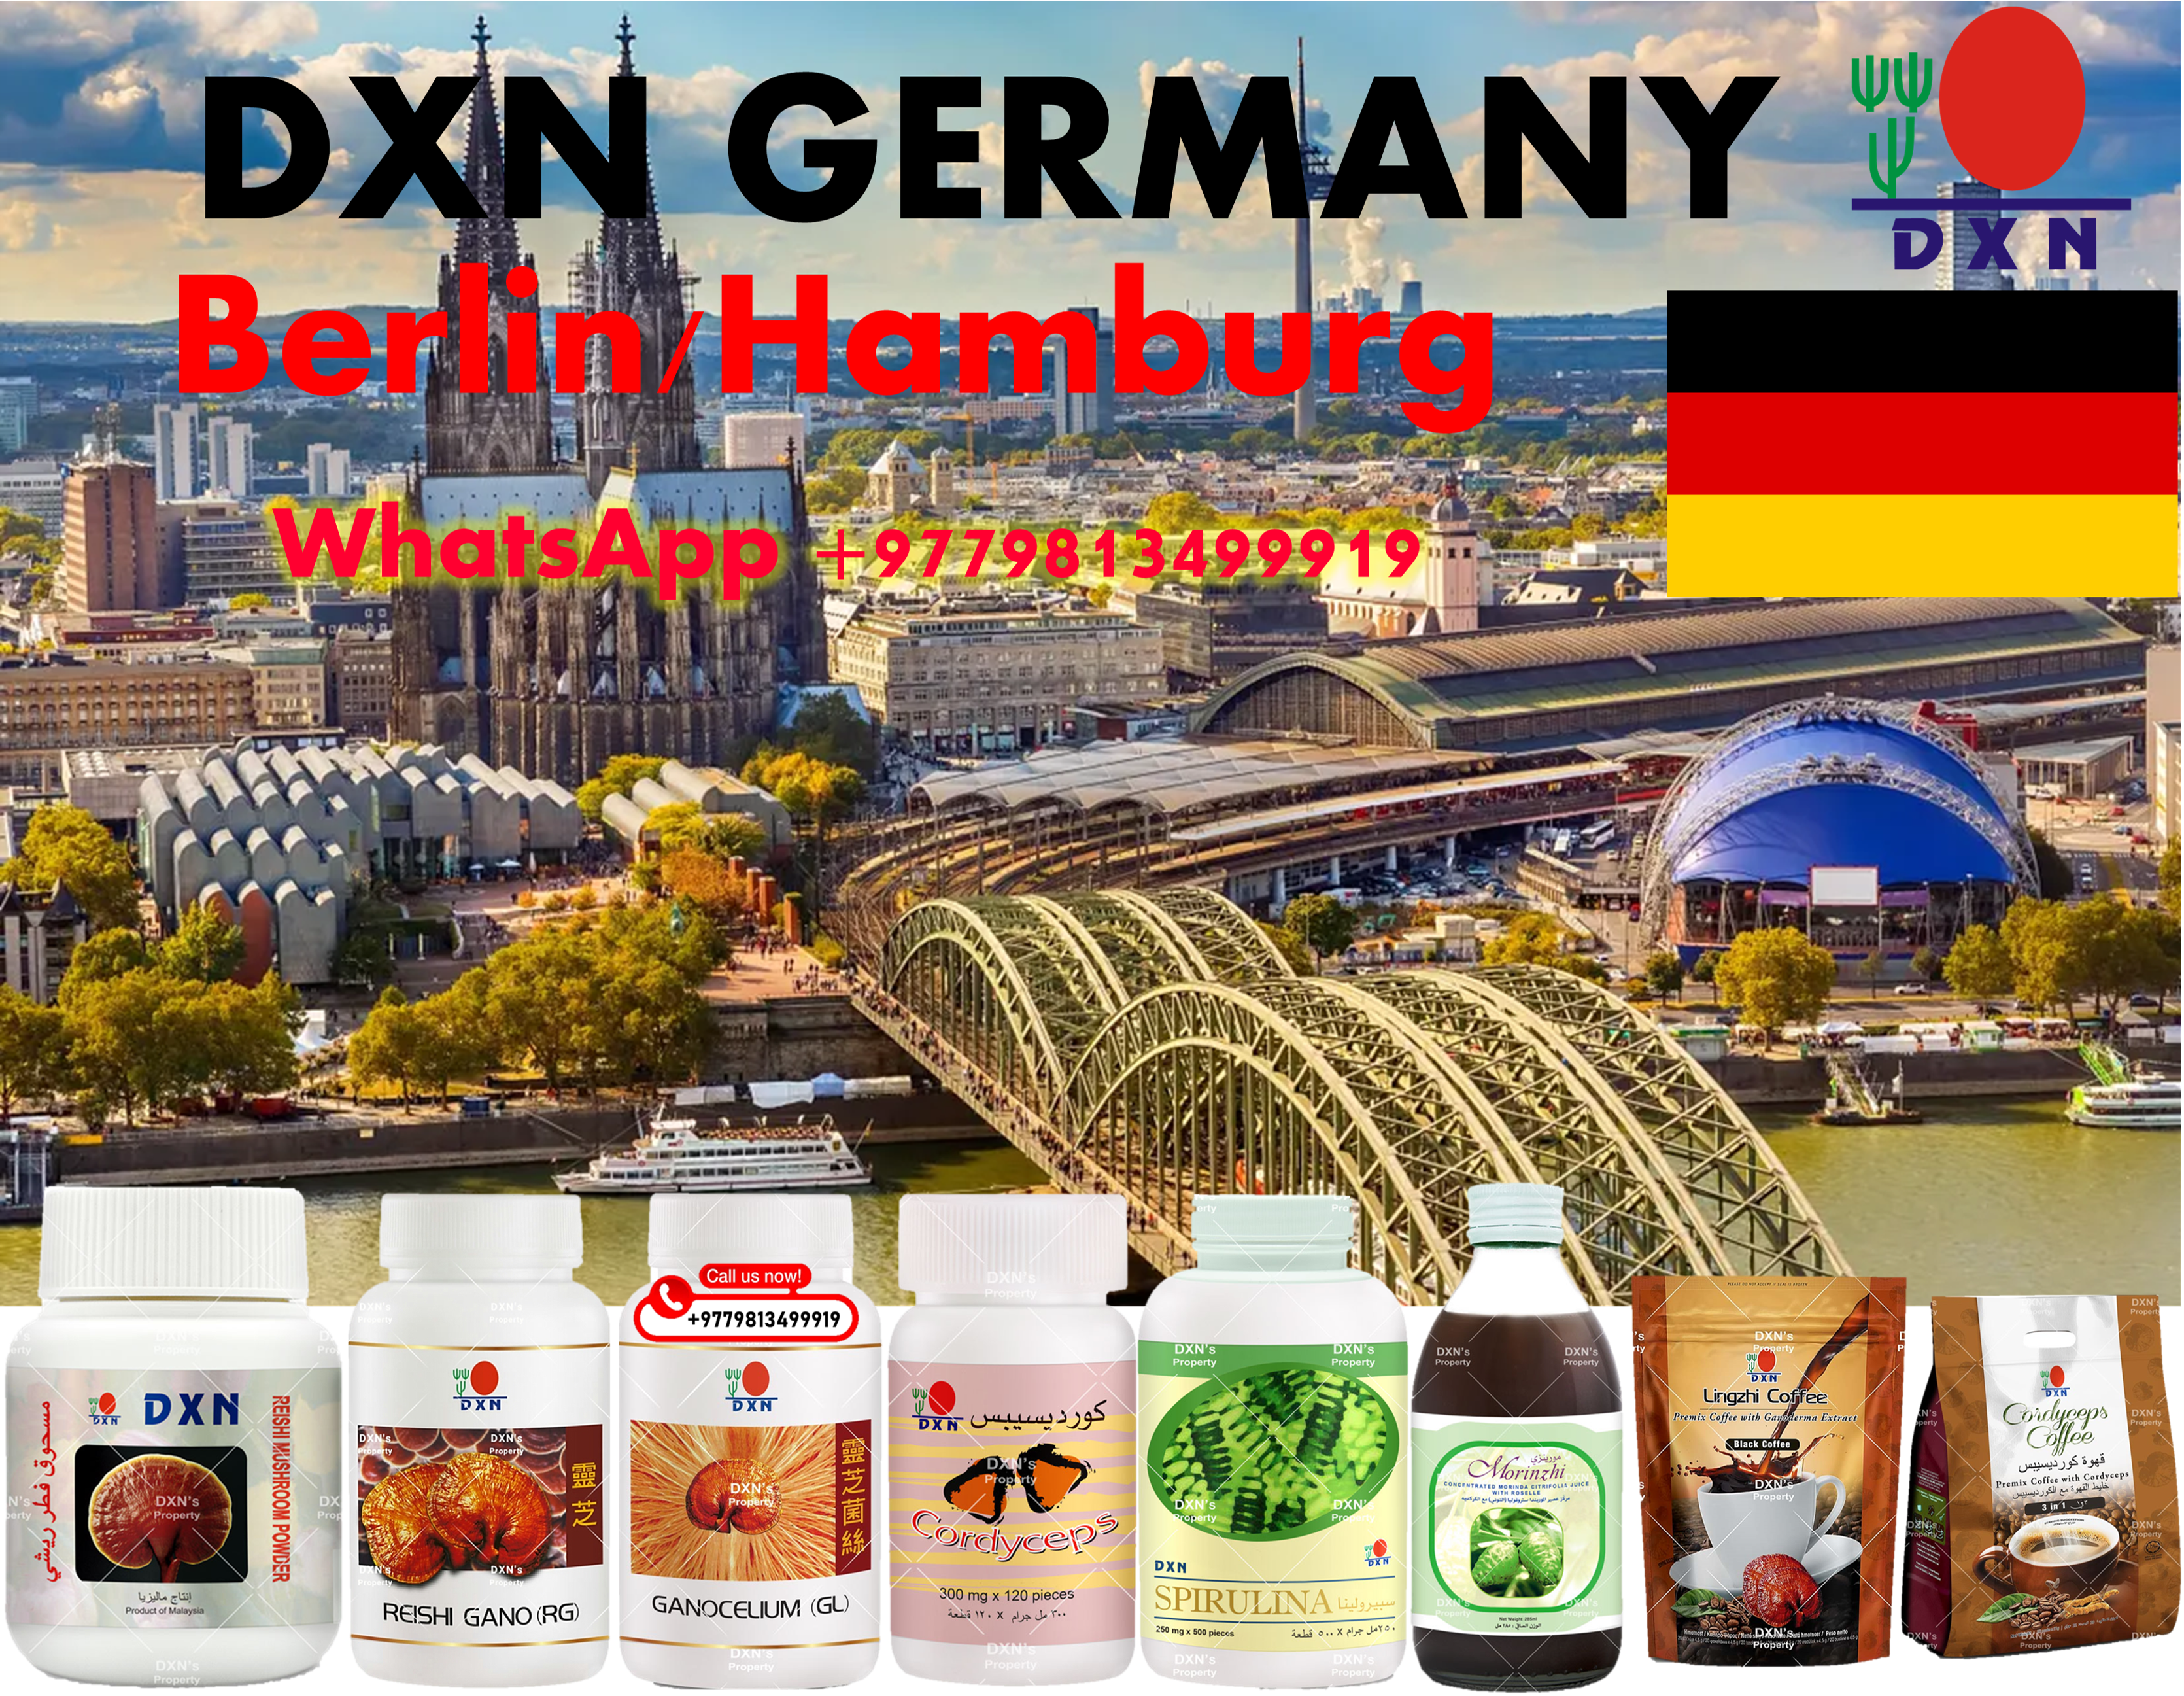 How to become a DXN Distributor in Germany? why and what is Benefits?